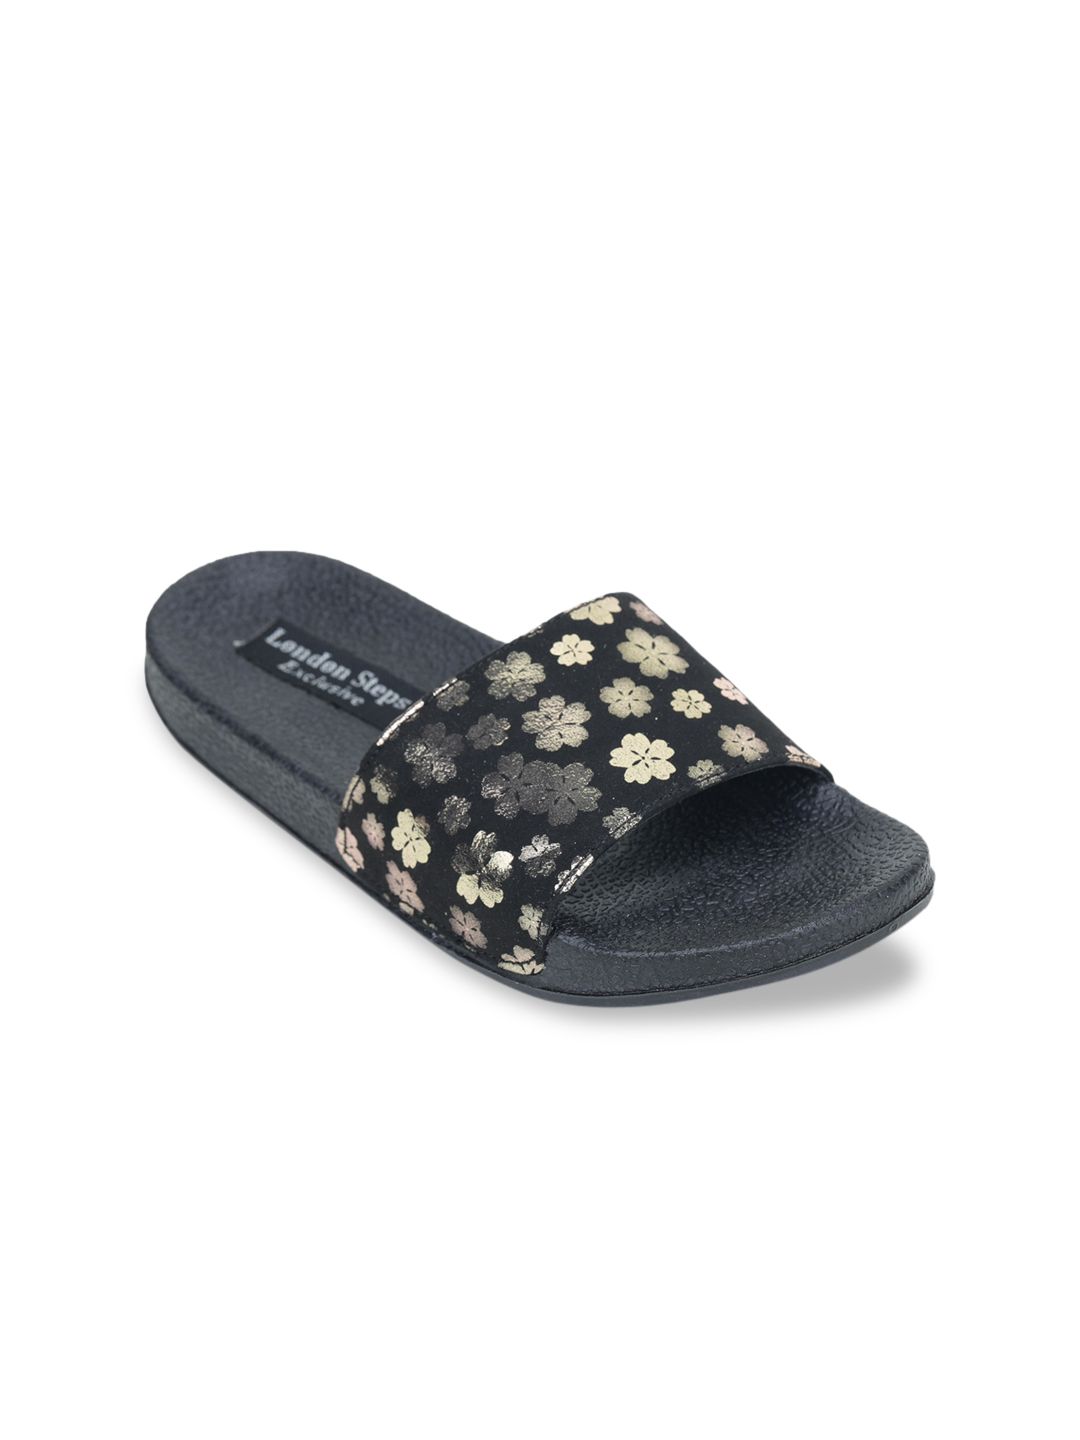 LONDON STEPS Women Black & Gold-Toned Printed Sliders Price in India